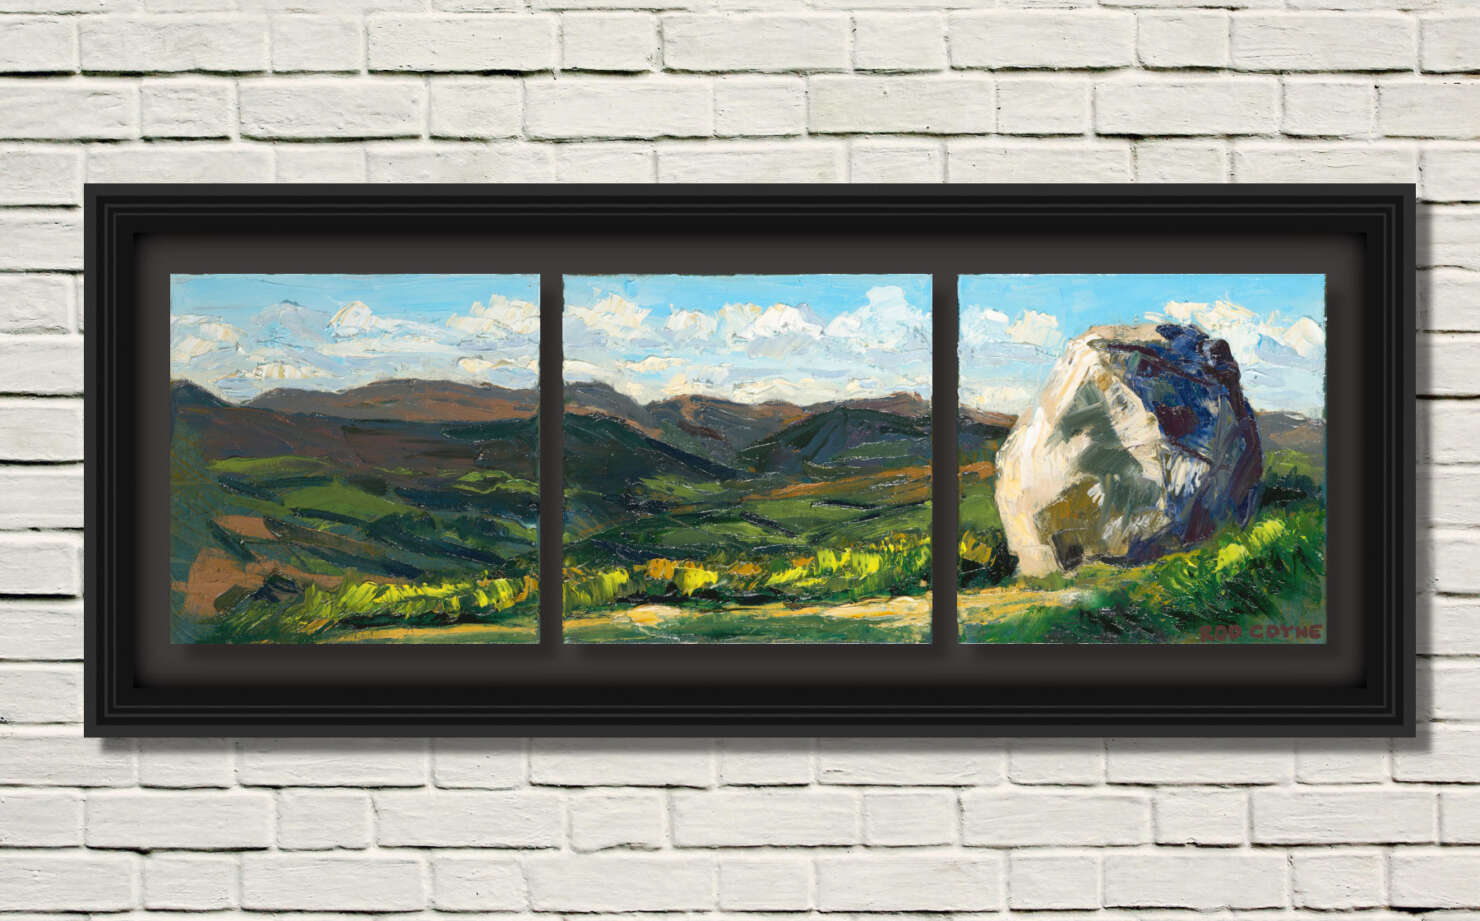 artist rod coyne's triptych painting "mottee stone" is shown here in a single black frame on a white brick wall.